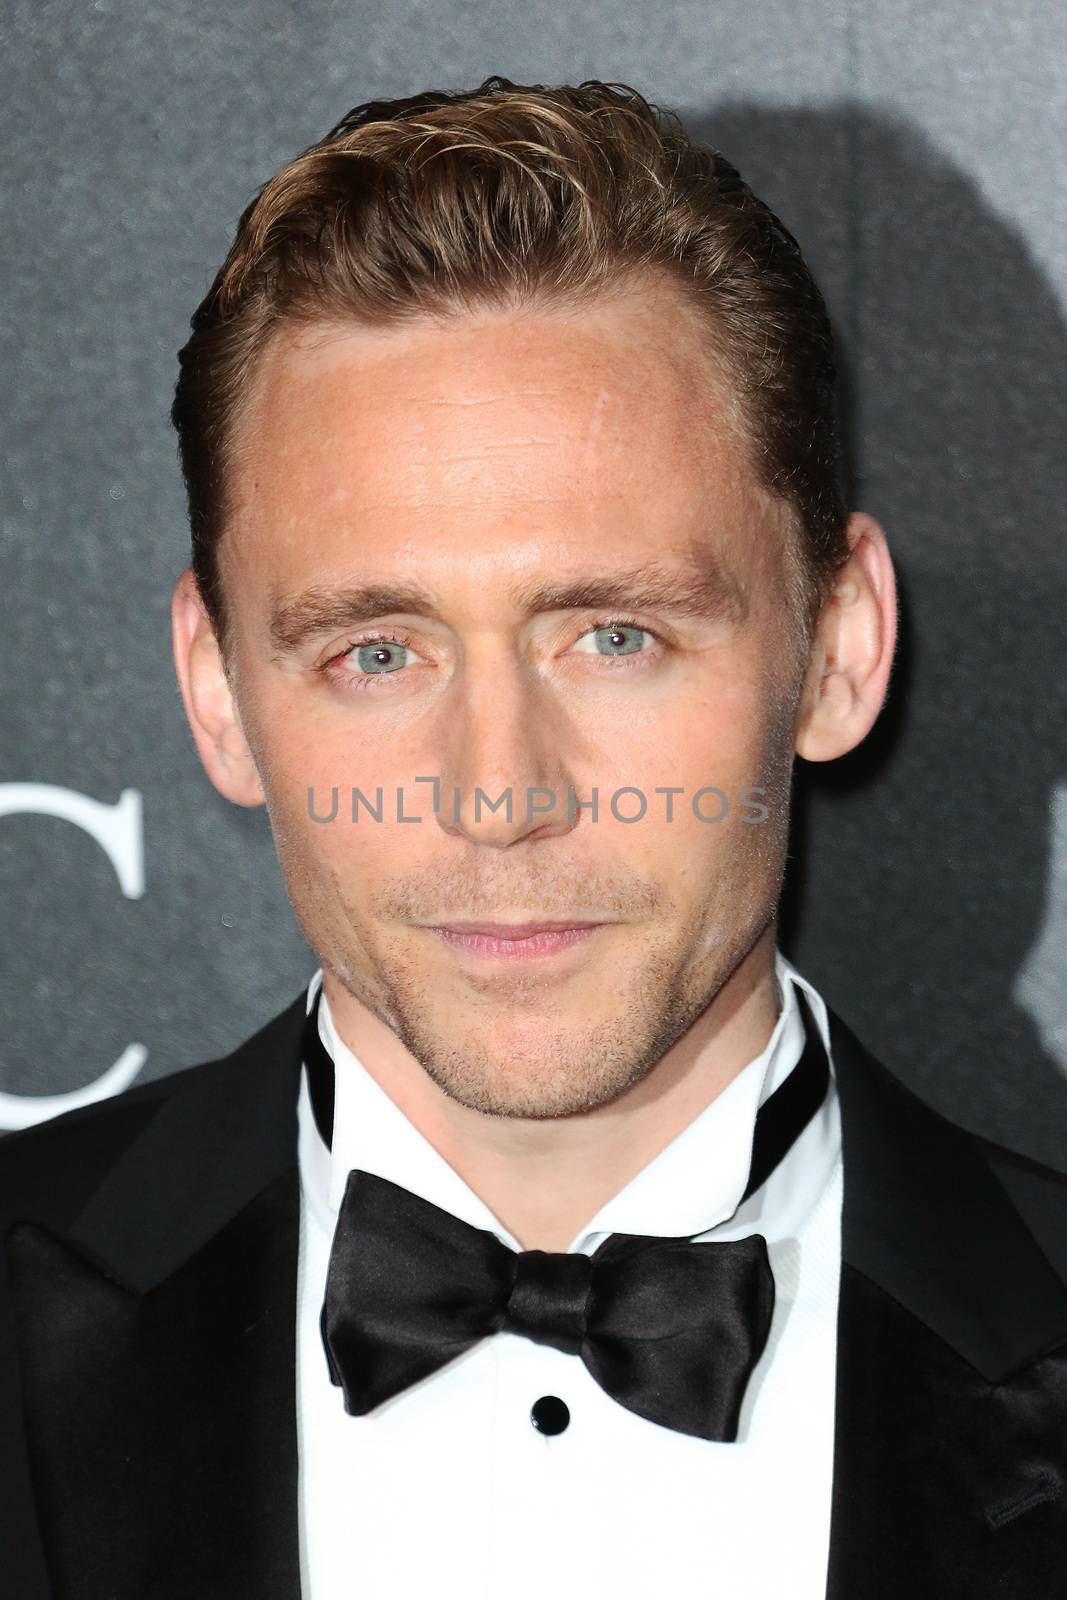 UNITED KINGDOM, London: Tom Hiddleston attends the BFI Luminous Fundraising Gala at Guildhall in London on October 6, 2015.